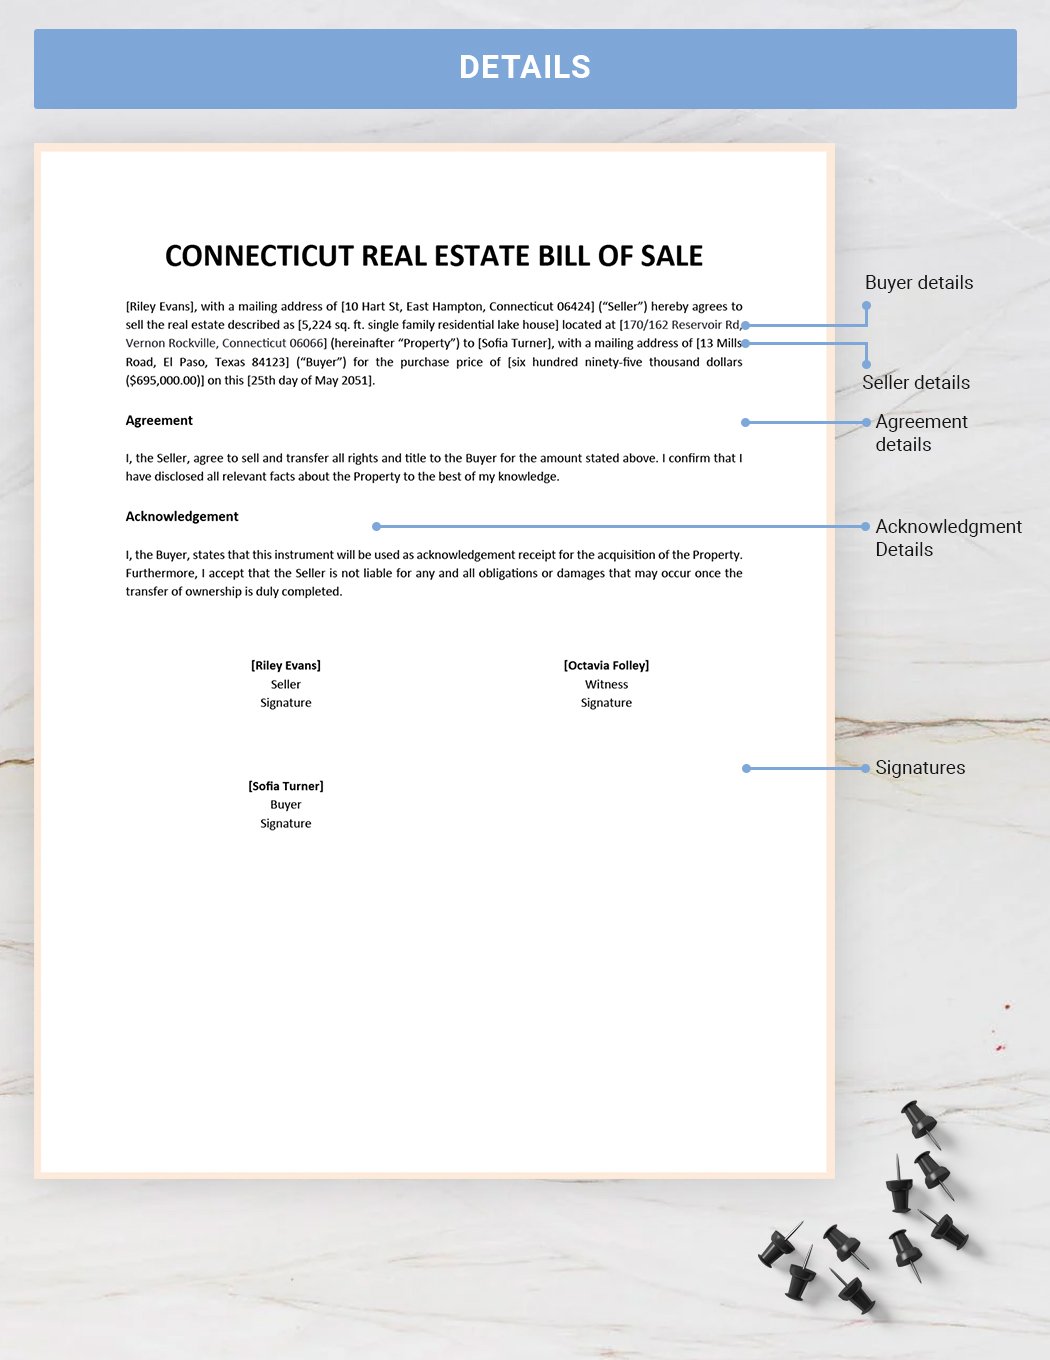 Connecticut Real Estate Bill of Sale Template